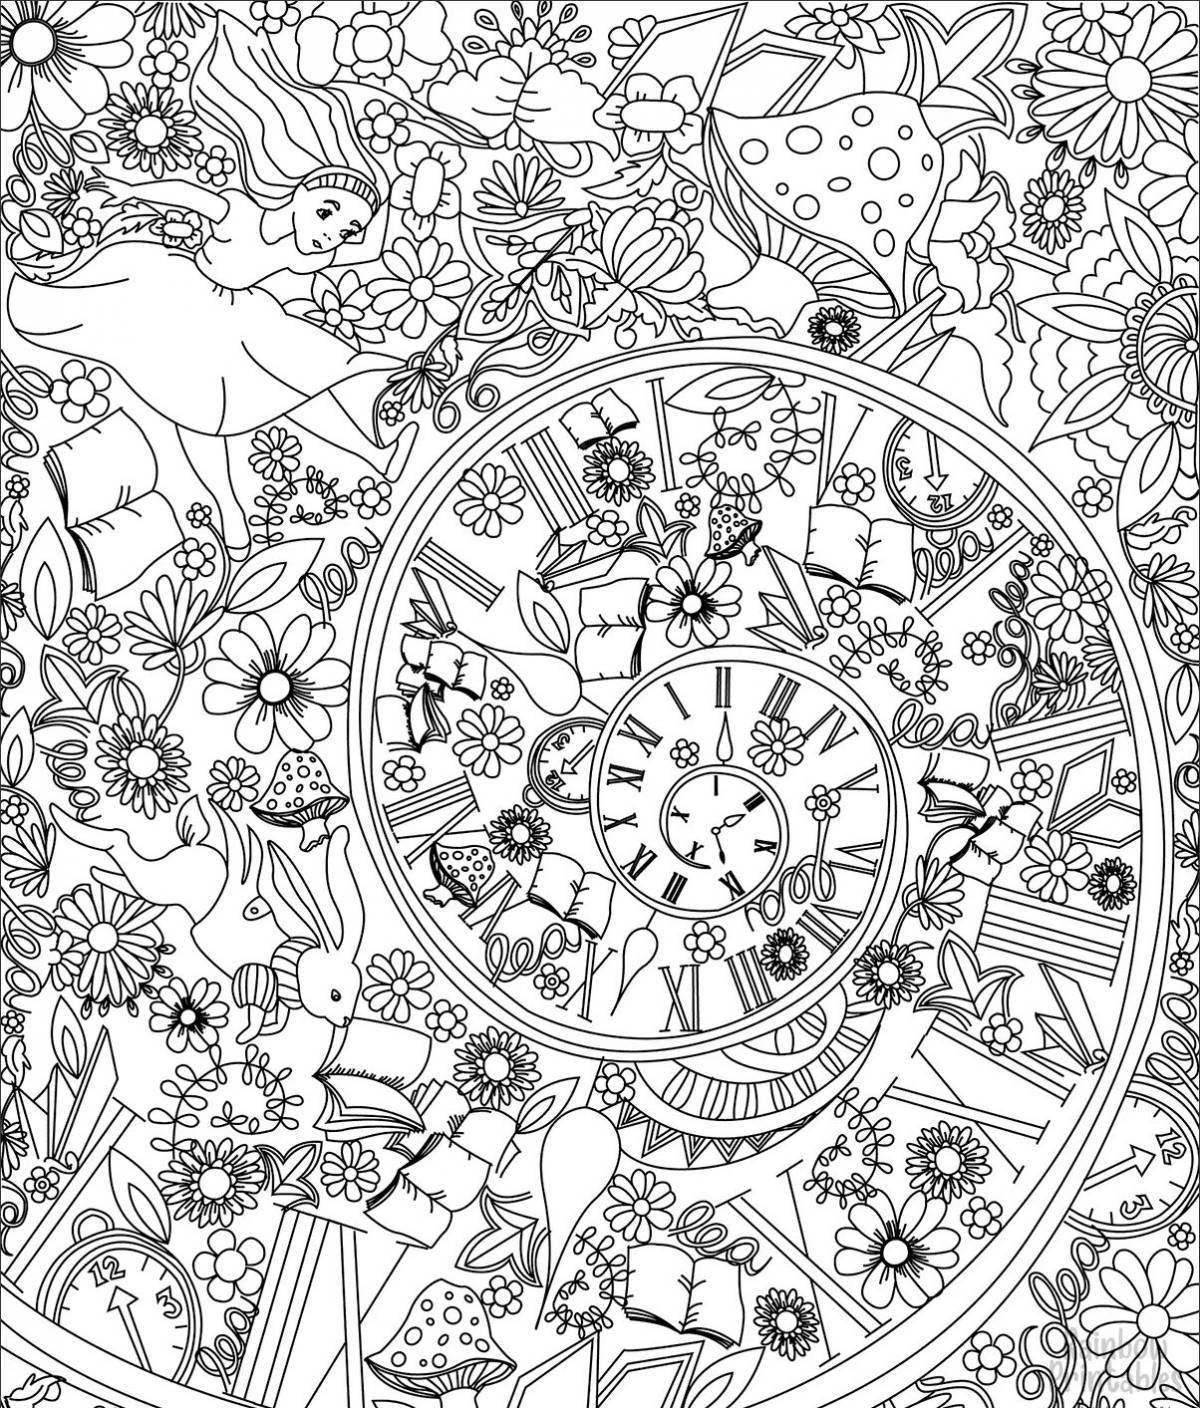 Large coloring book for adults